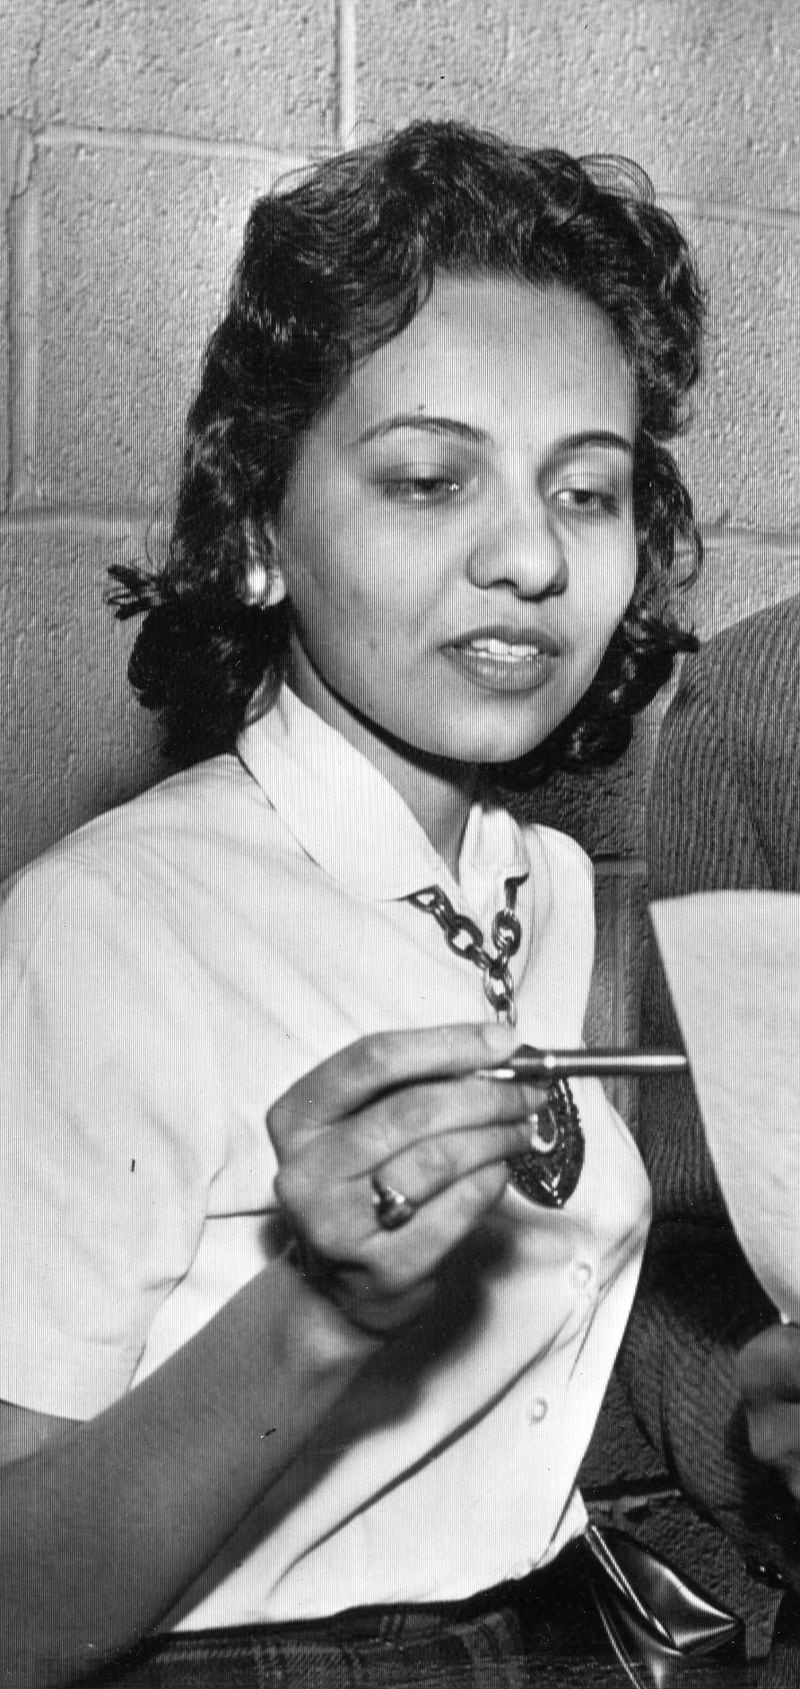 Diane Nash, a leader in the Nashville group which sent "Freedom Riders" to Alabama in 1960. Nash was coordinator of the central committee of the Nashville Student Non-Violence Movement. Photo made April 10, 1960. (AP Wirephoto)